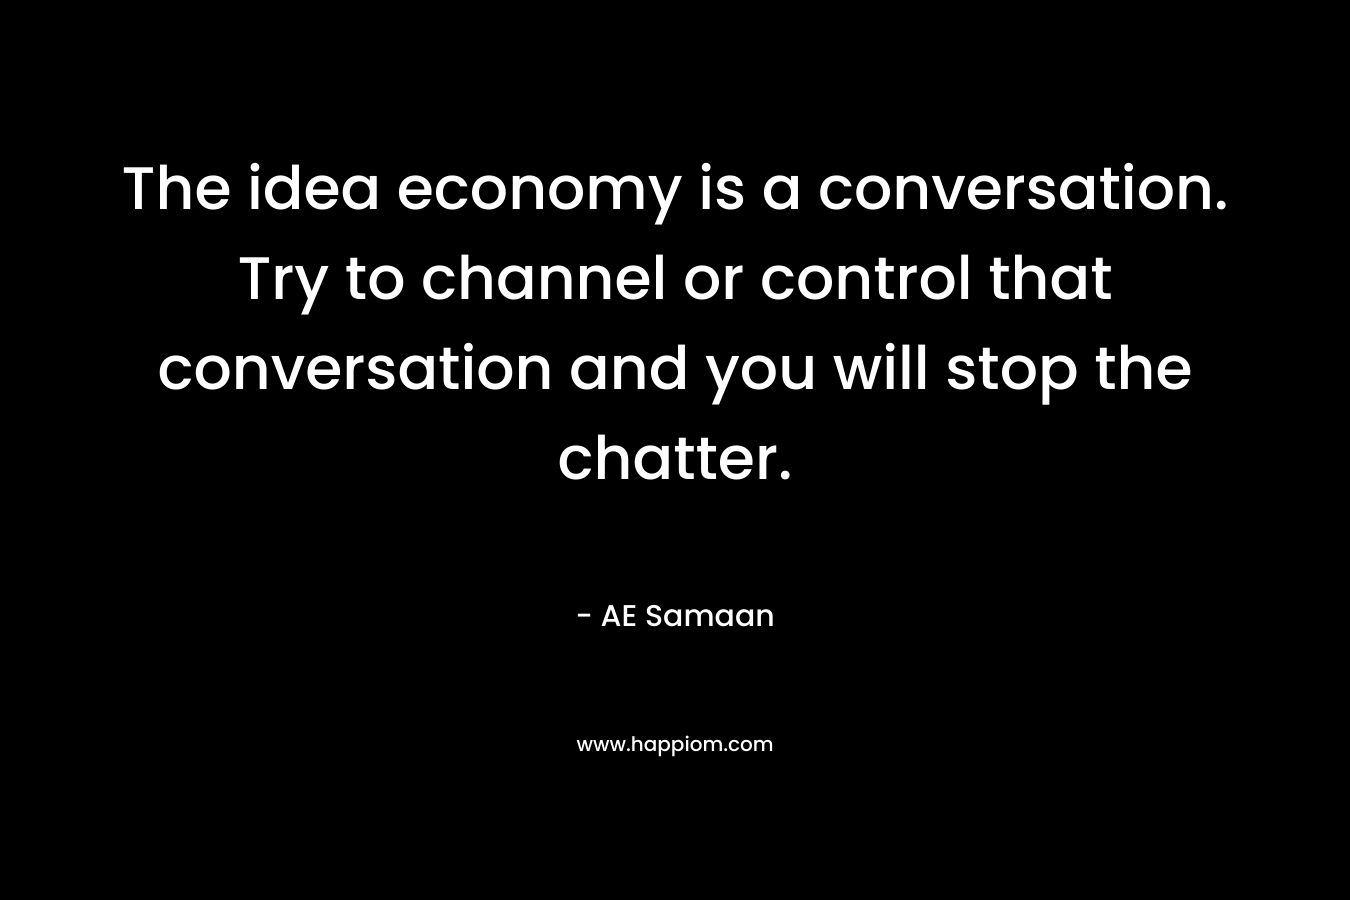 The idea economy is a conversation. Try to channel or control that conversation and you will stop the chatter. – AE Samaan